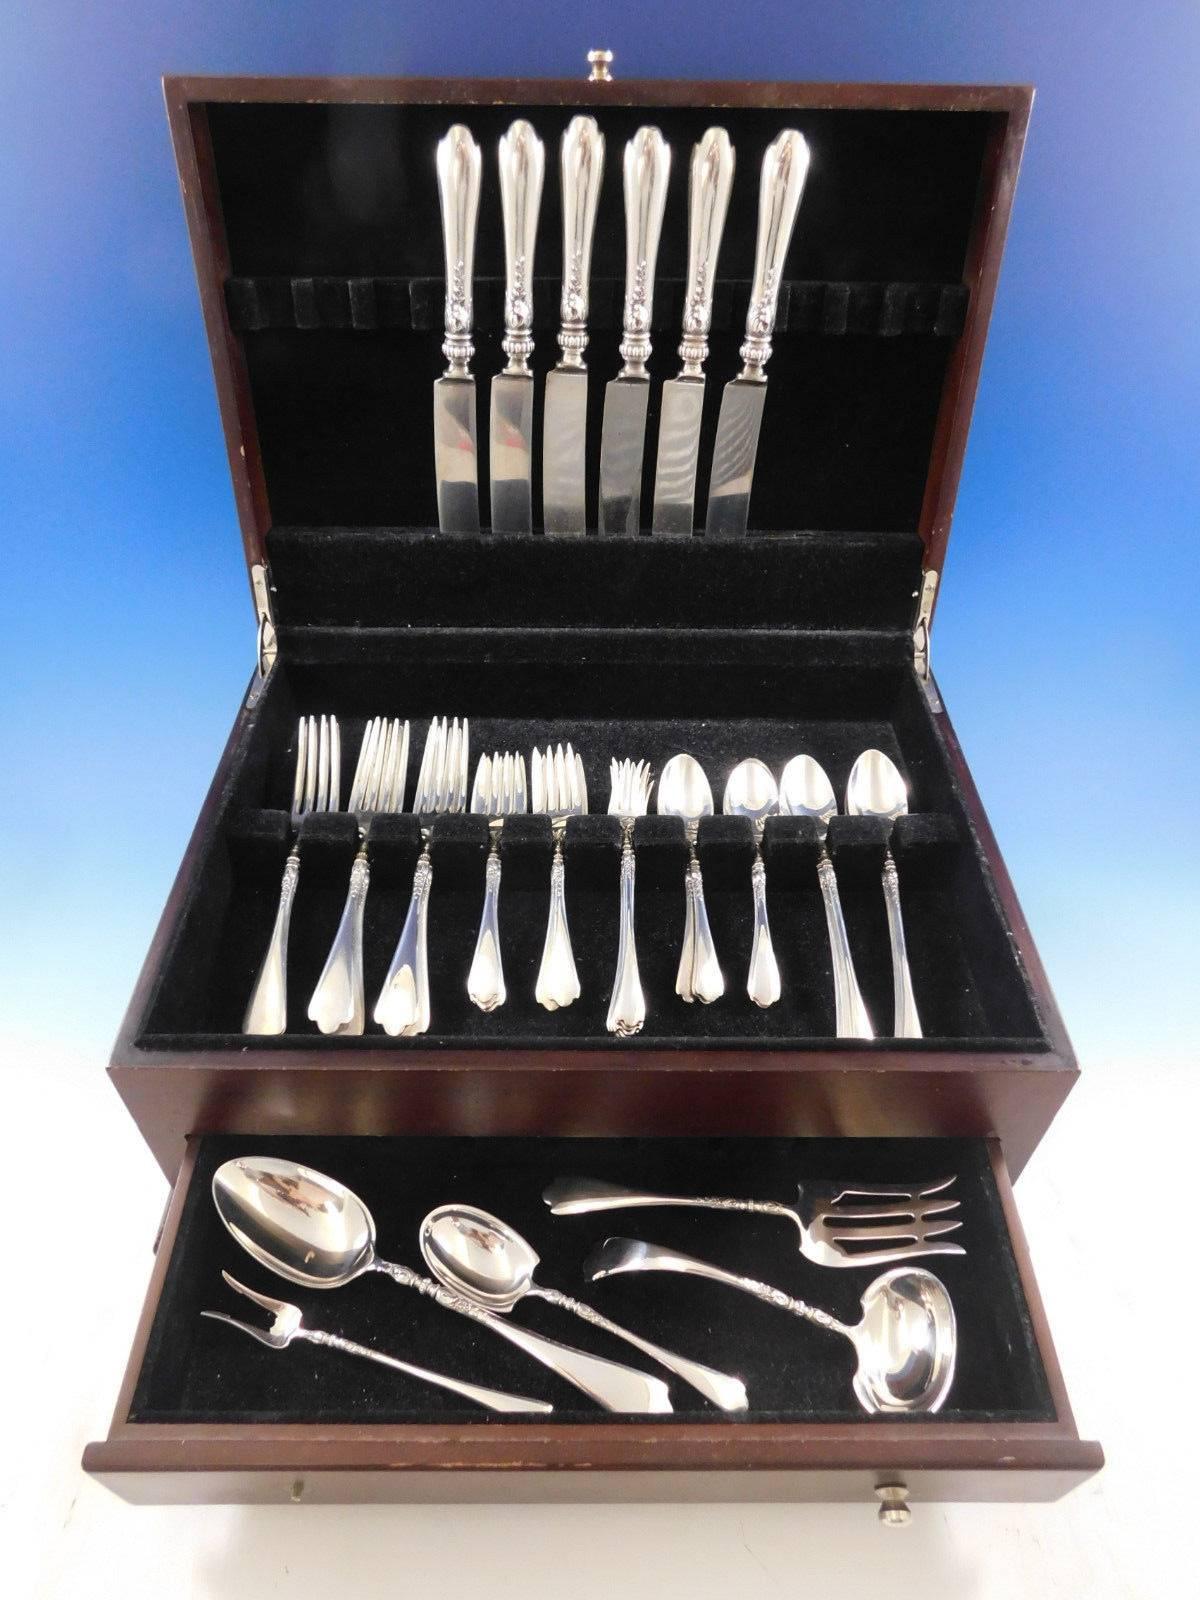 Nellie Custis by Lunt (circa 1915) Sterling Silver Flatware set - 41 pieces. Great starter set! This set includes: 

6 Dinner Size Knives, 9 1/2